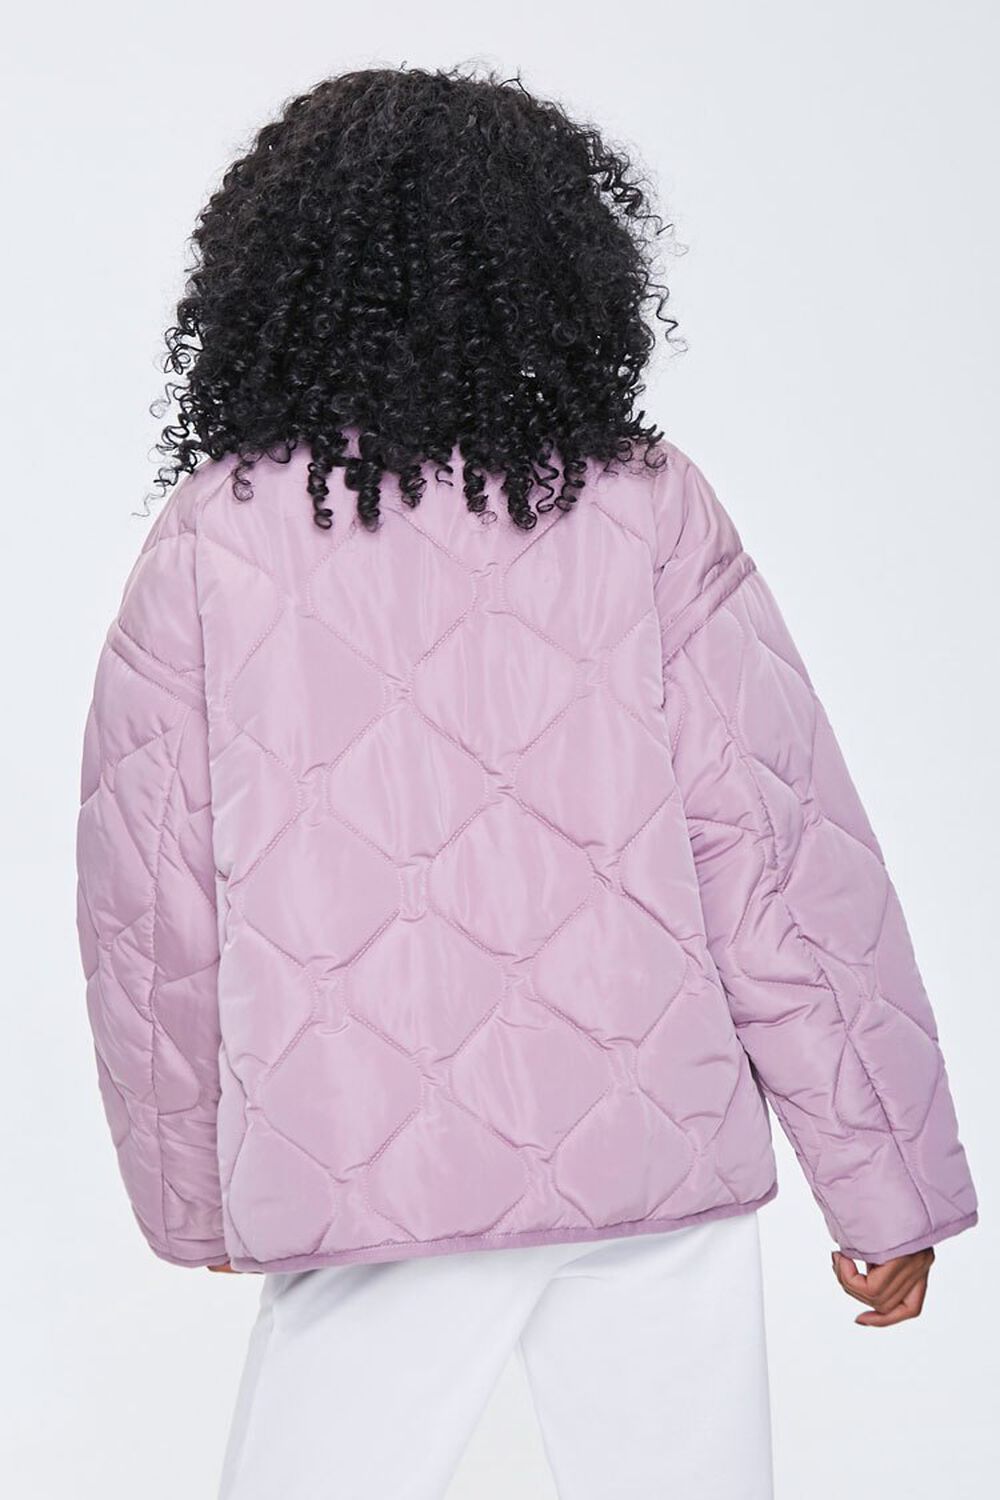 LILAC Quilted Puffer Jacket, image 3